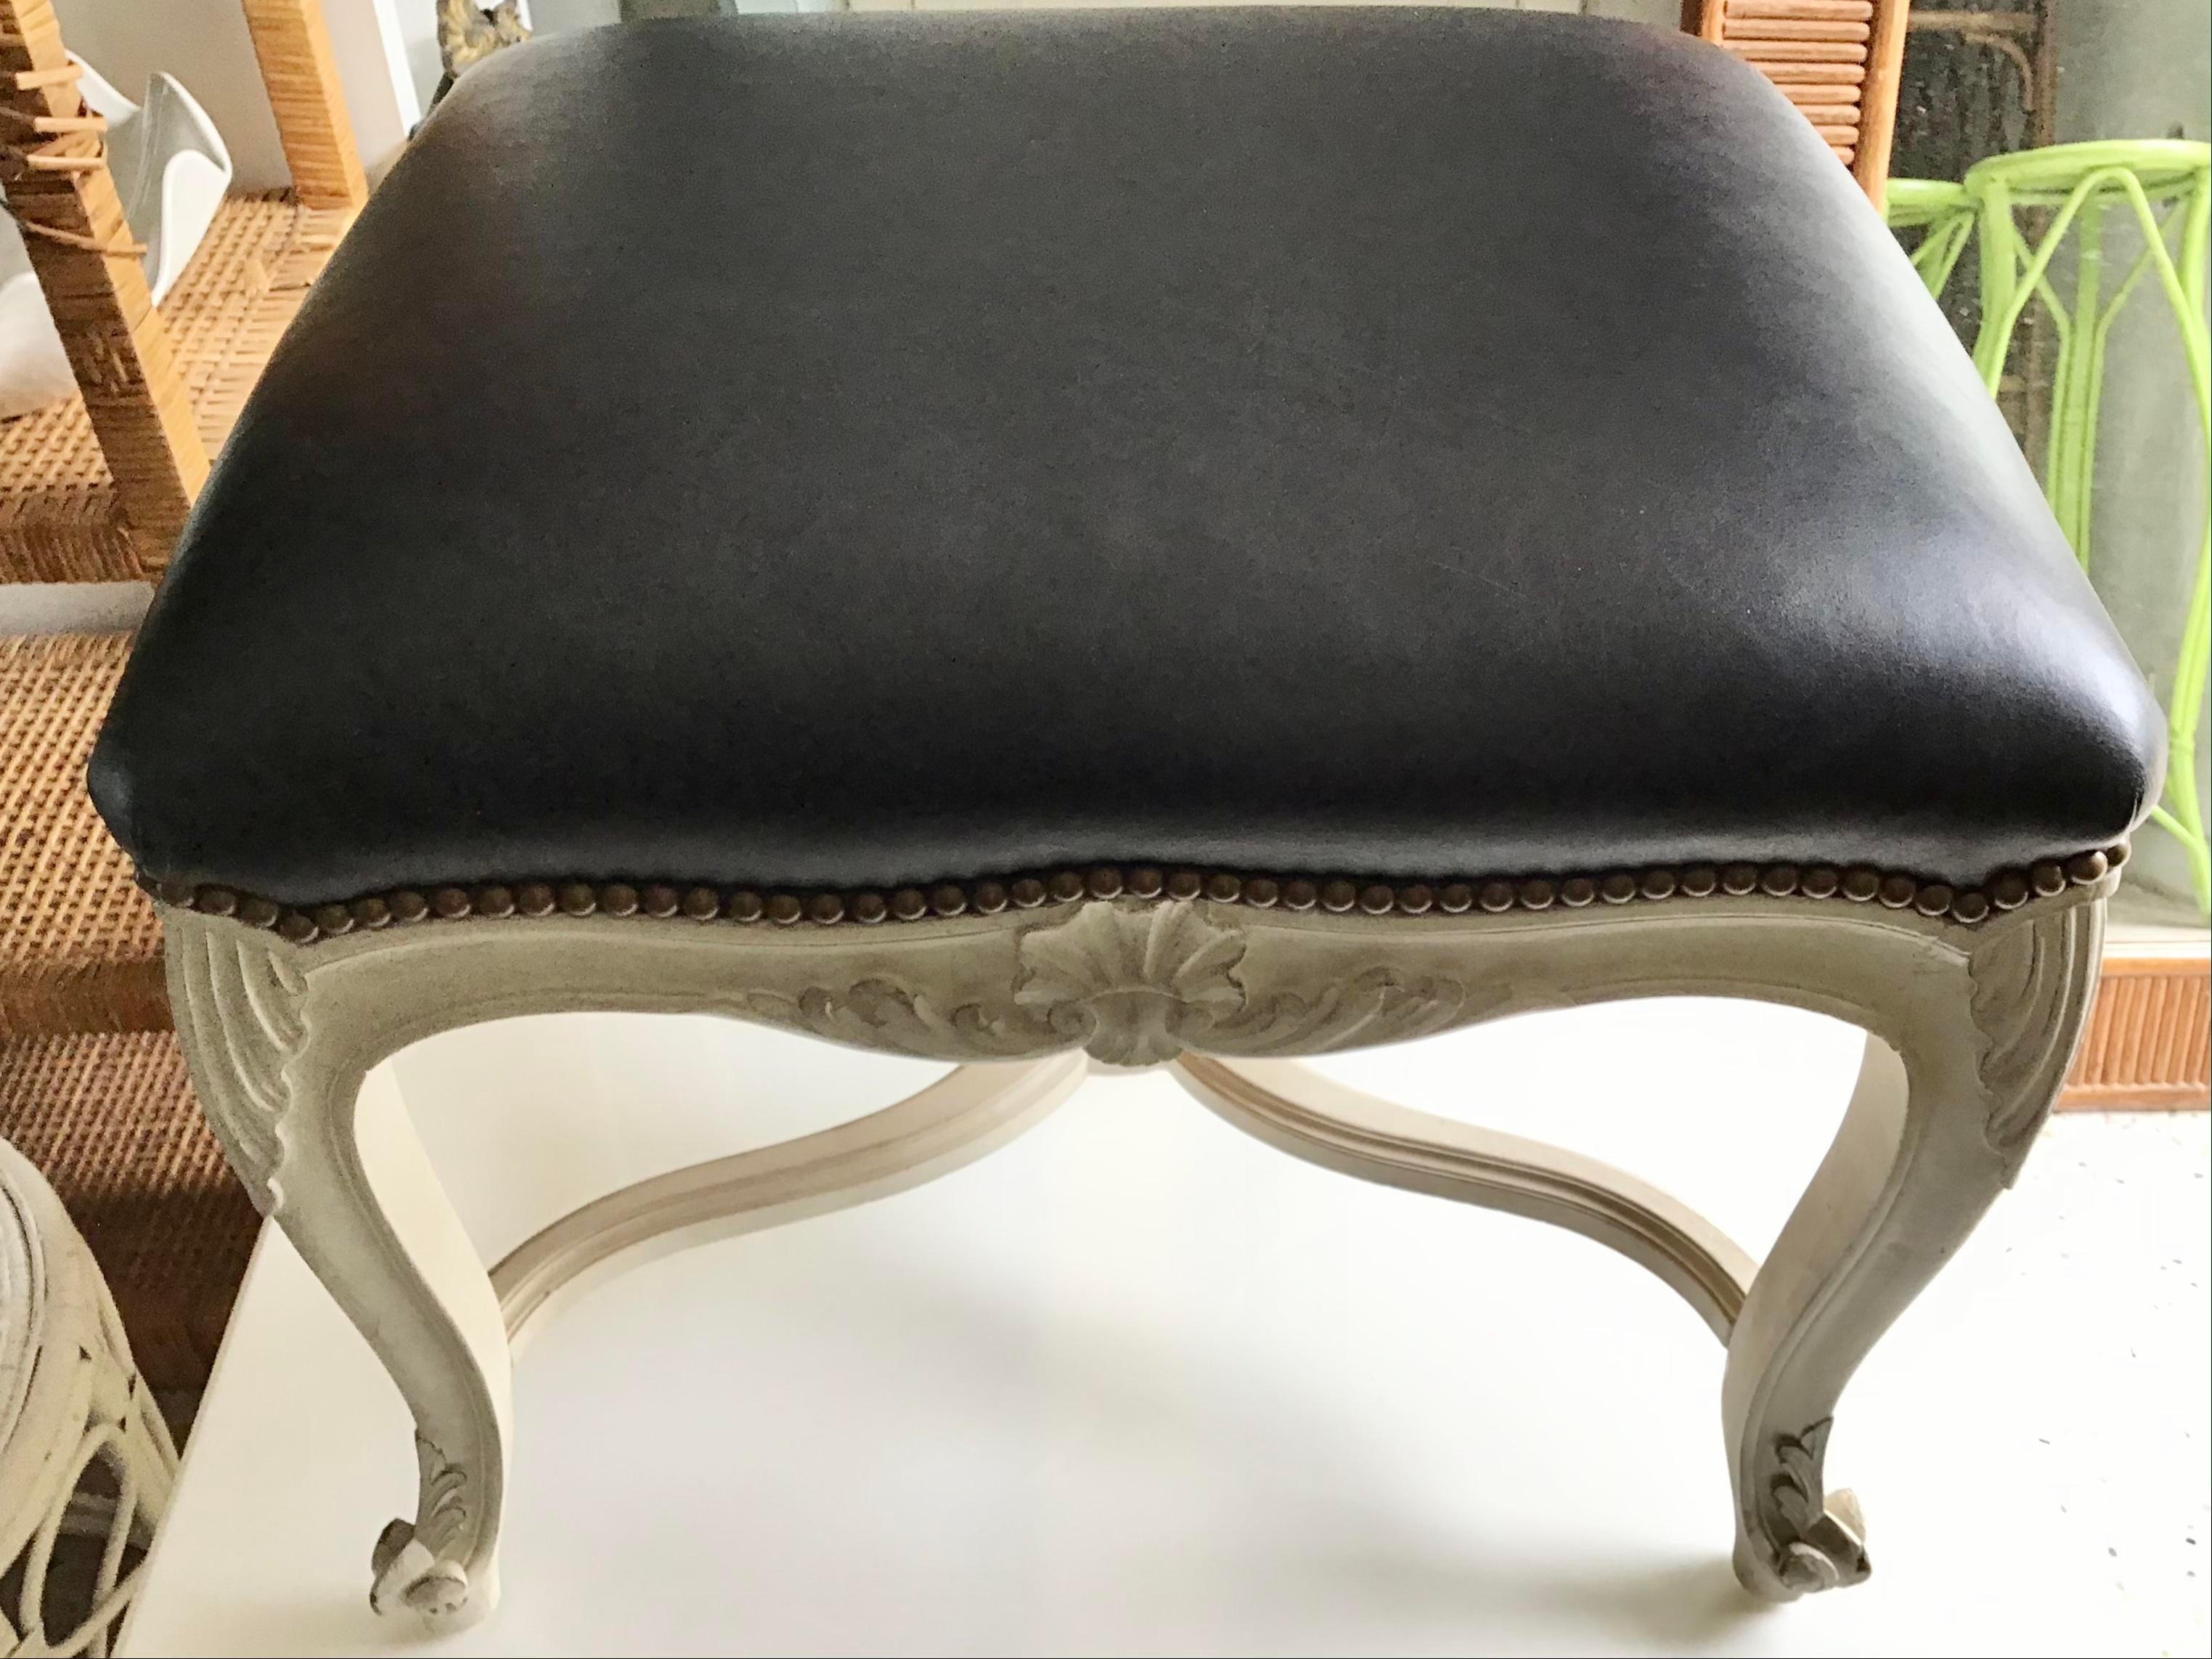 19th Century French Louis XV Bench with Black Leather Upholstery